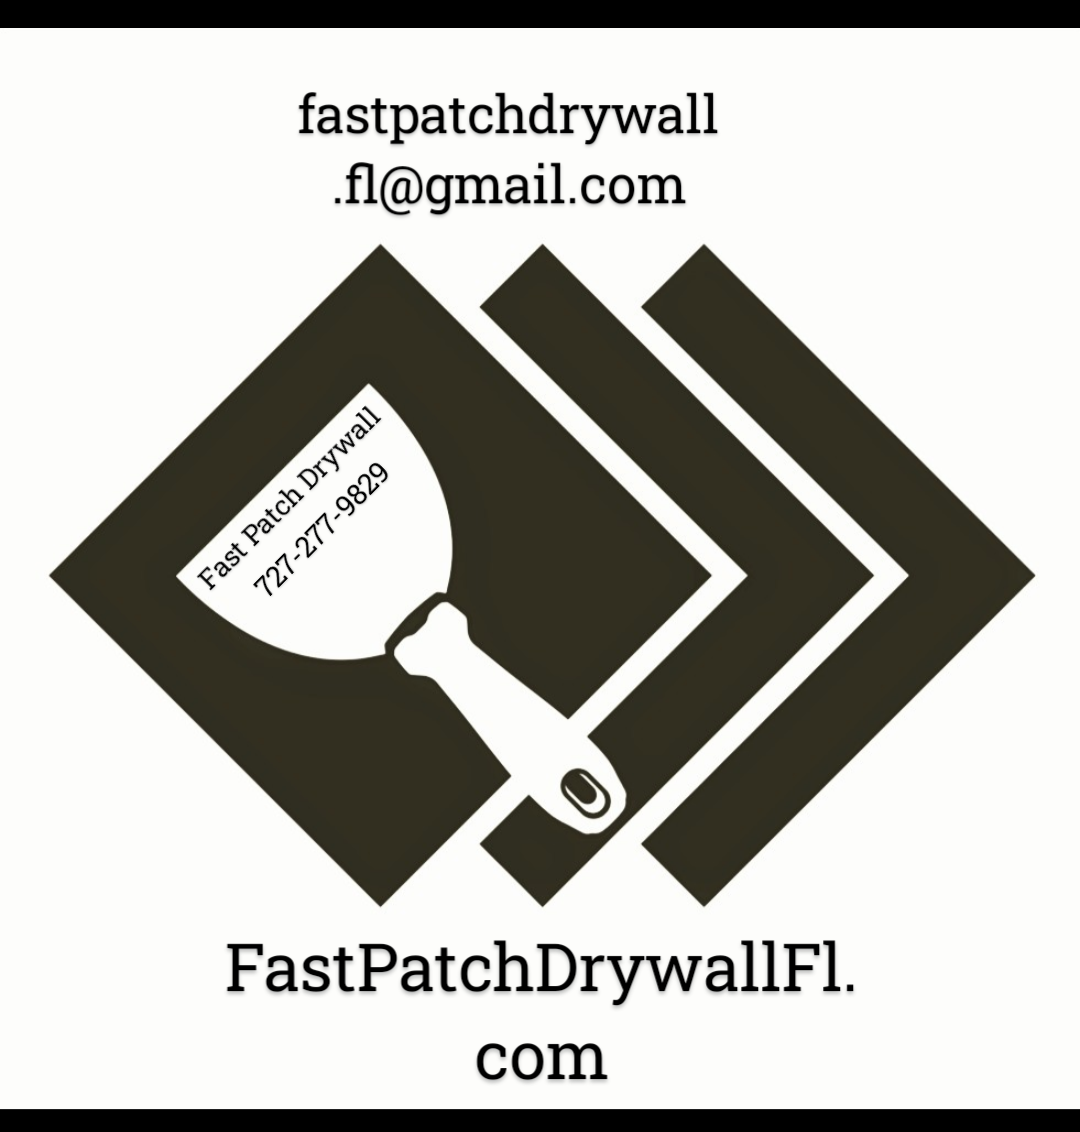 Fast Patch Drywall review